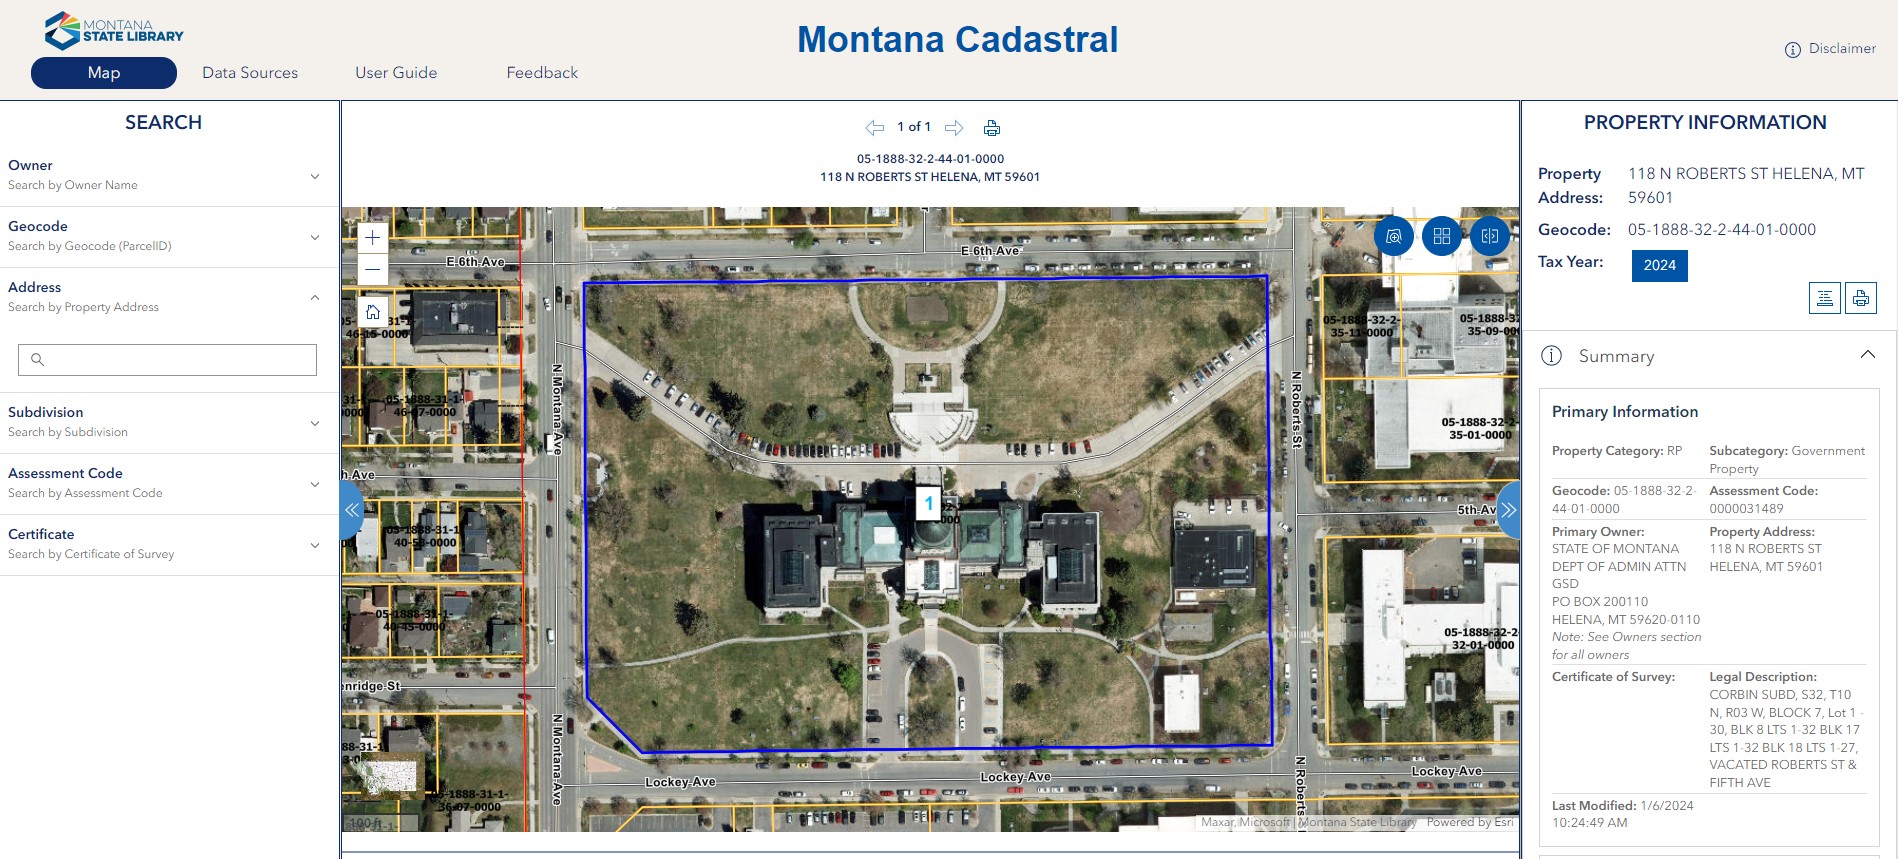 Cadastral Home Page